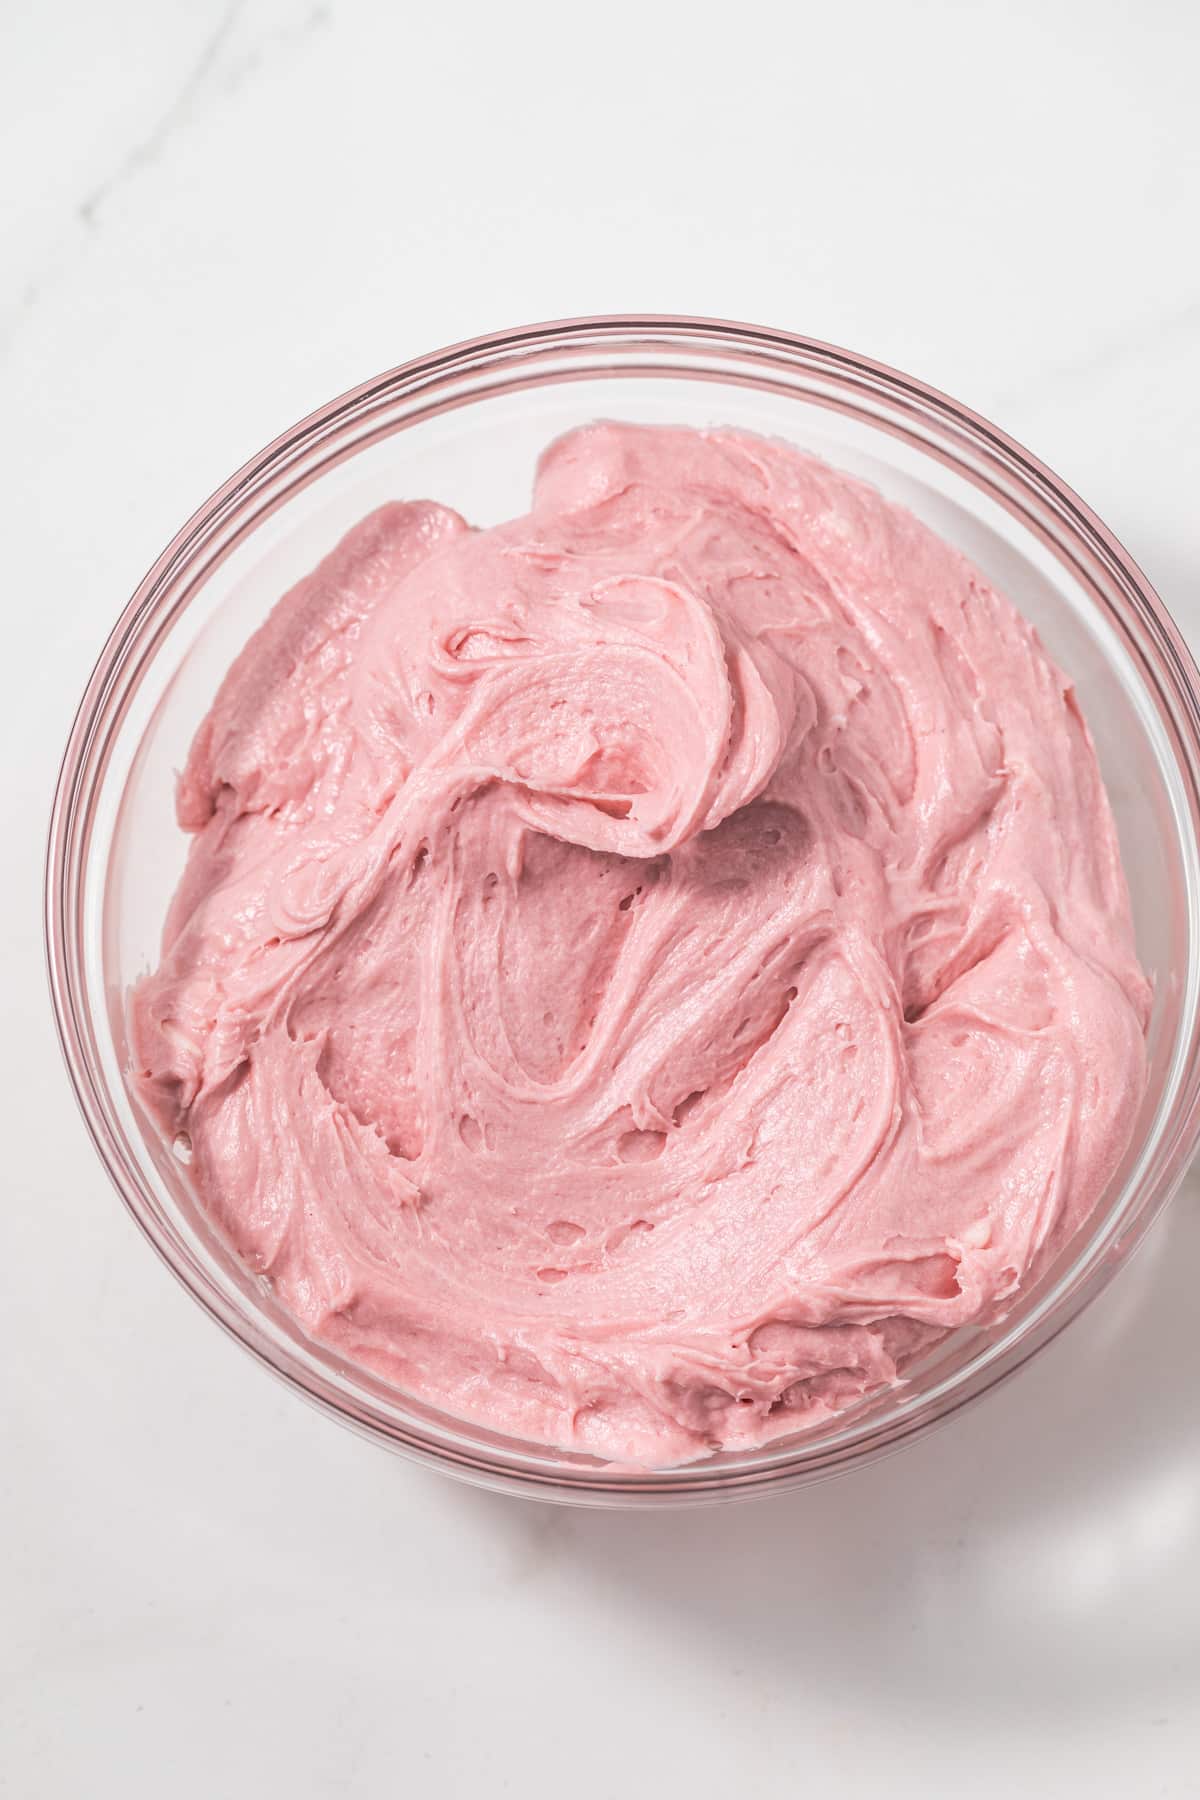 Raspberry frosting in a glass bowl.